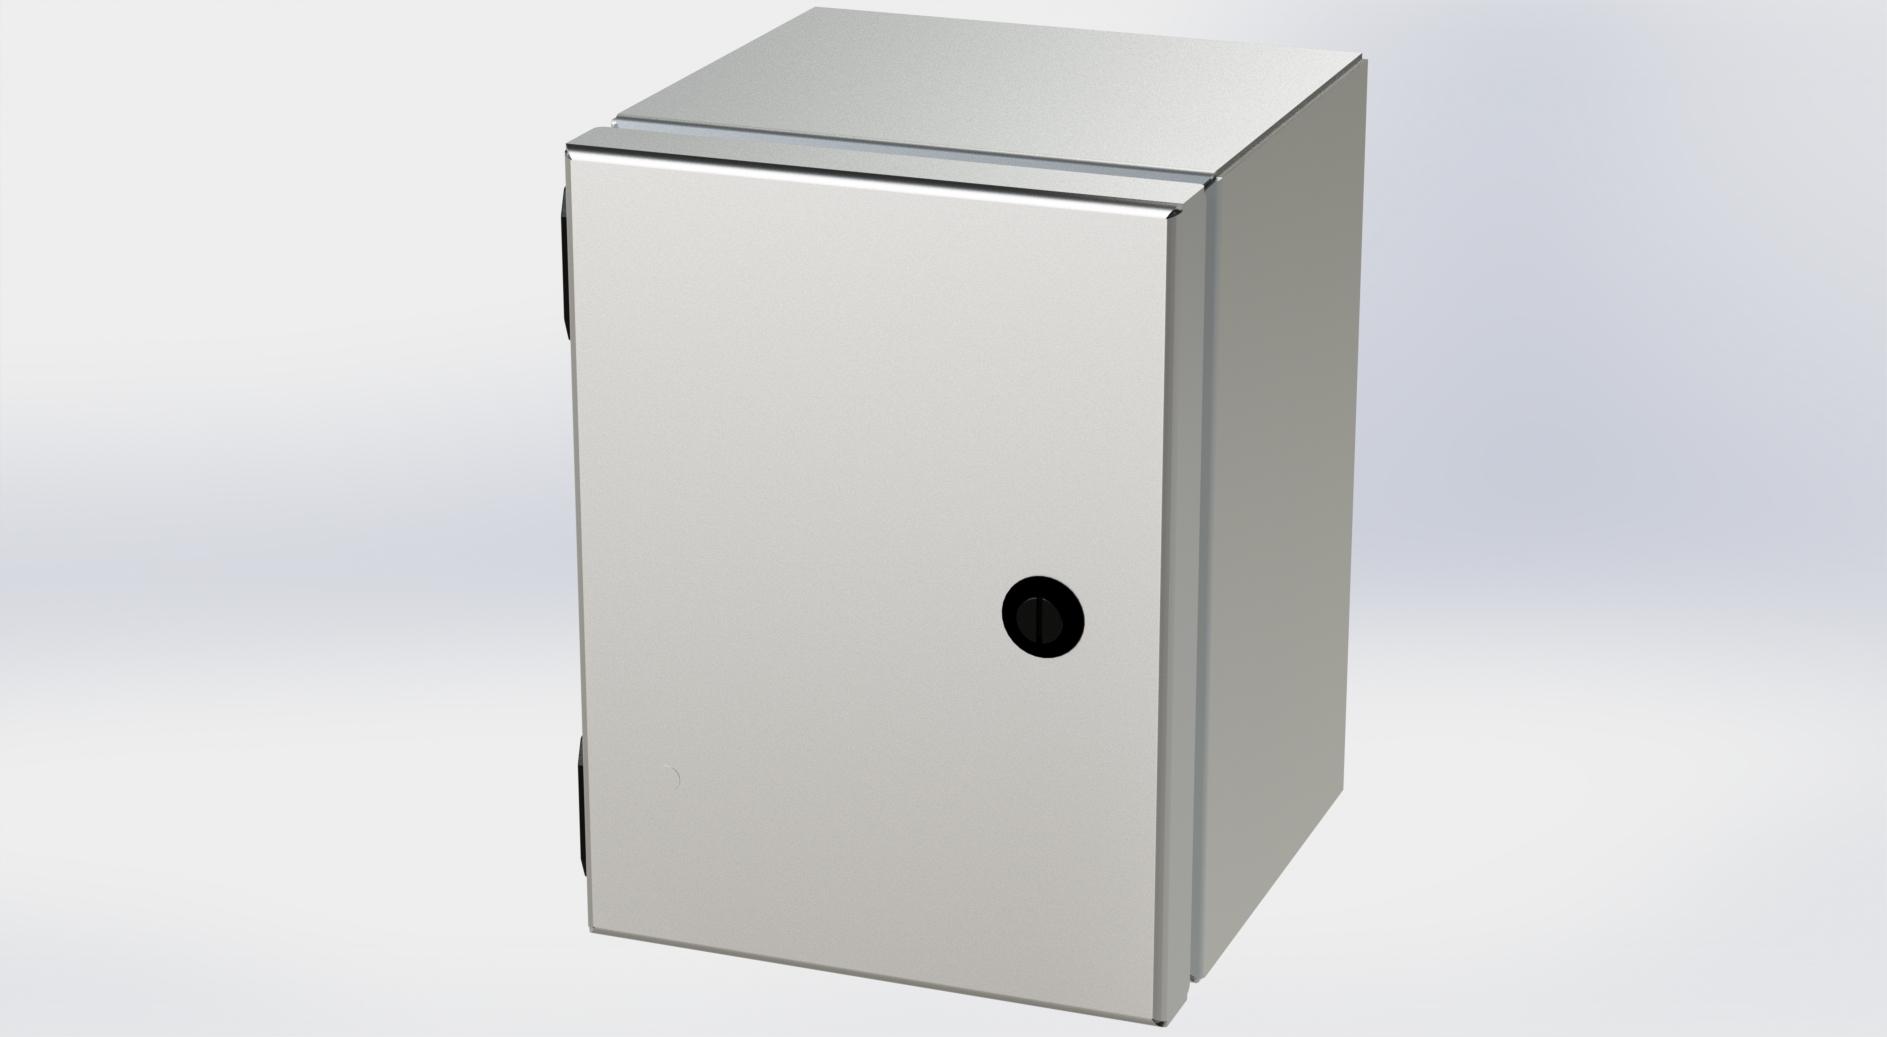 Saginaw Control SCE-8066ELJSS6 S.S. ELJ Enclosure, Height:8.00", Width:6.00", Depth:6.00", #4 brushed finish on all exterior surfaces. Optional sub-panels are powder coated white.